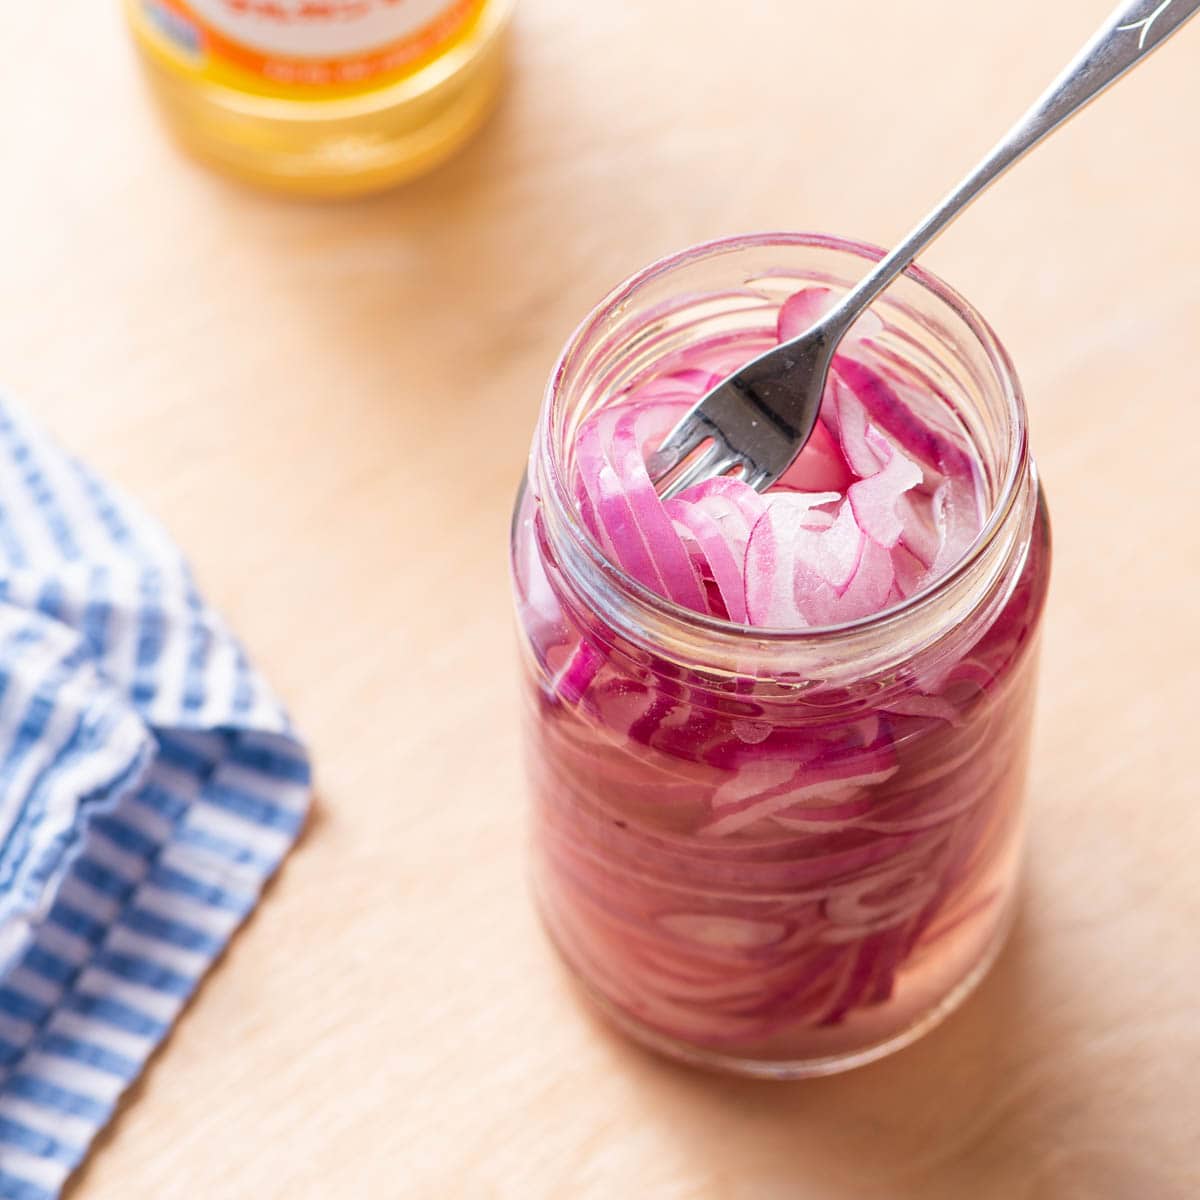 Refrigerator Quick Pickled Red Onions - BEST RECIPE!!